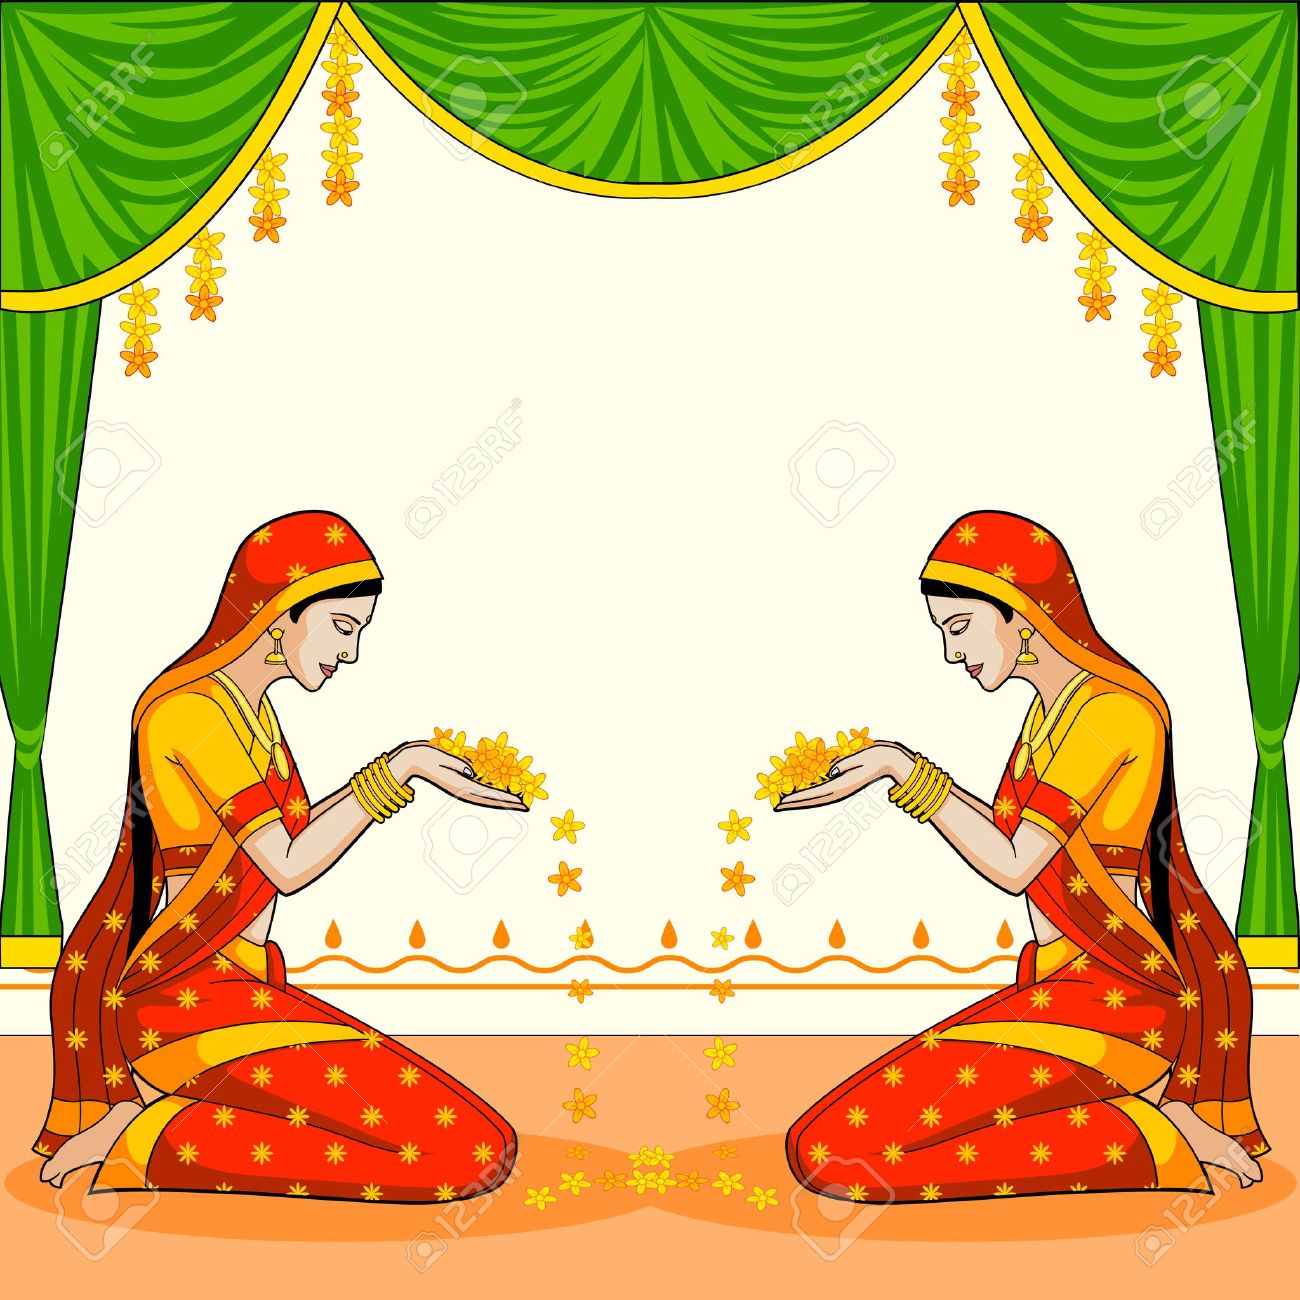 Download Indian Woman Clipart at GetDrawings.com | Free for personal use Indian Woman Clipart of your choice